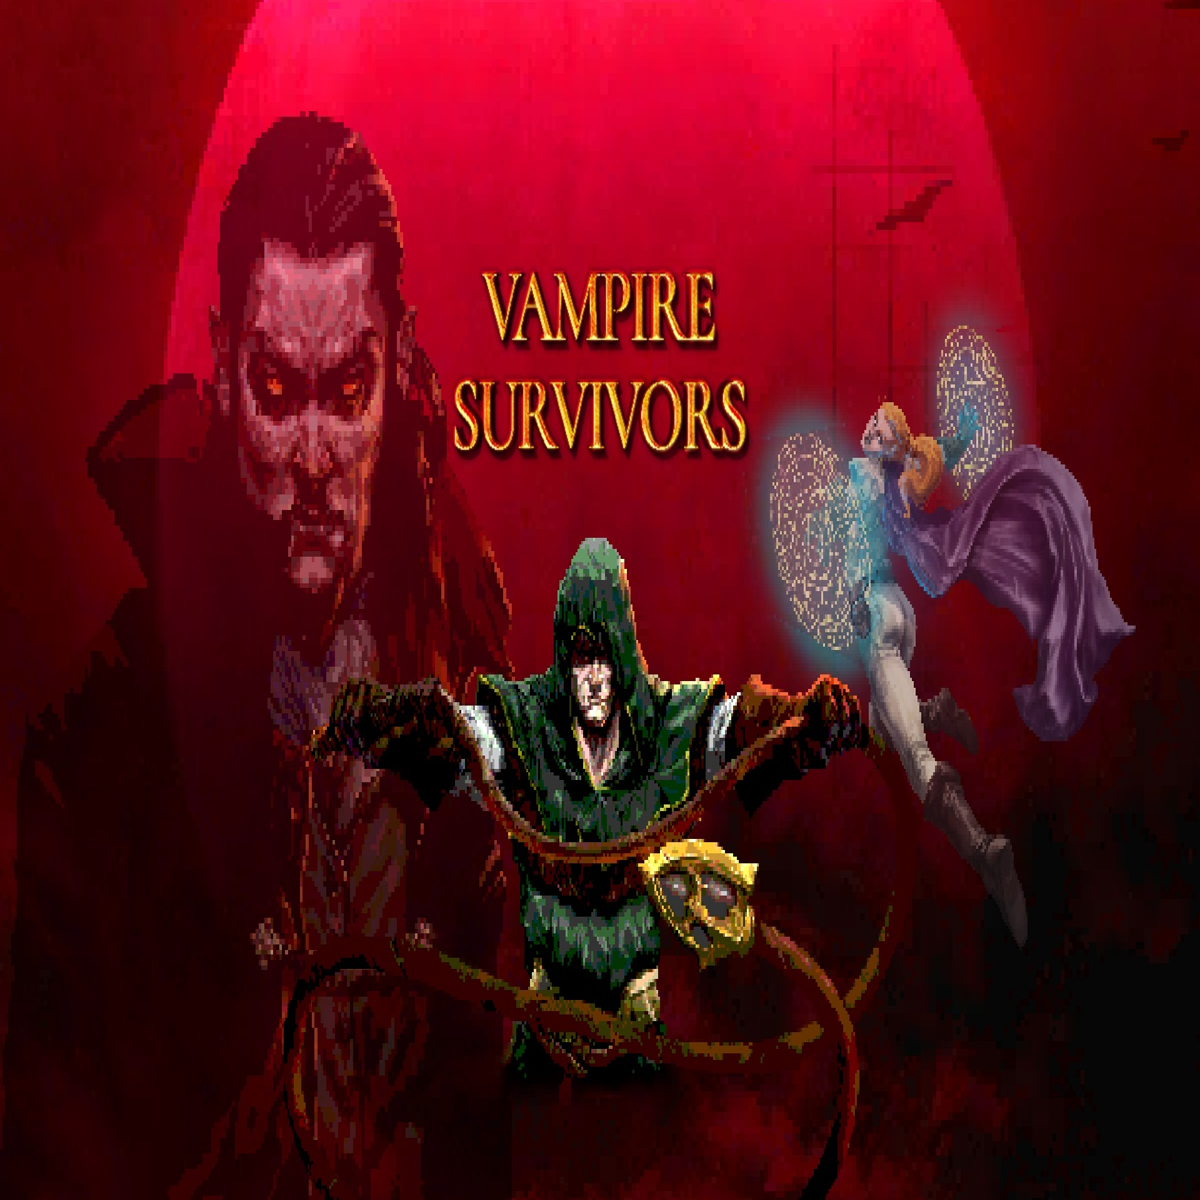 Vampire Survivors: Can a one-handed game be enjoyed by a person